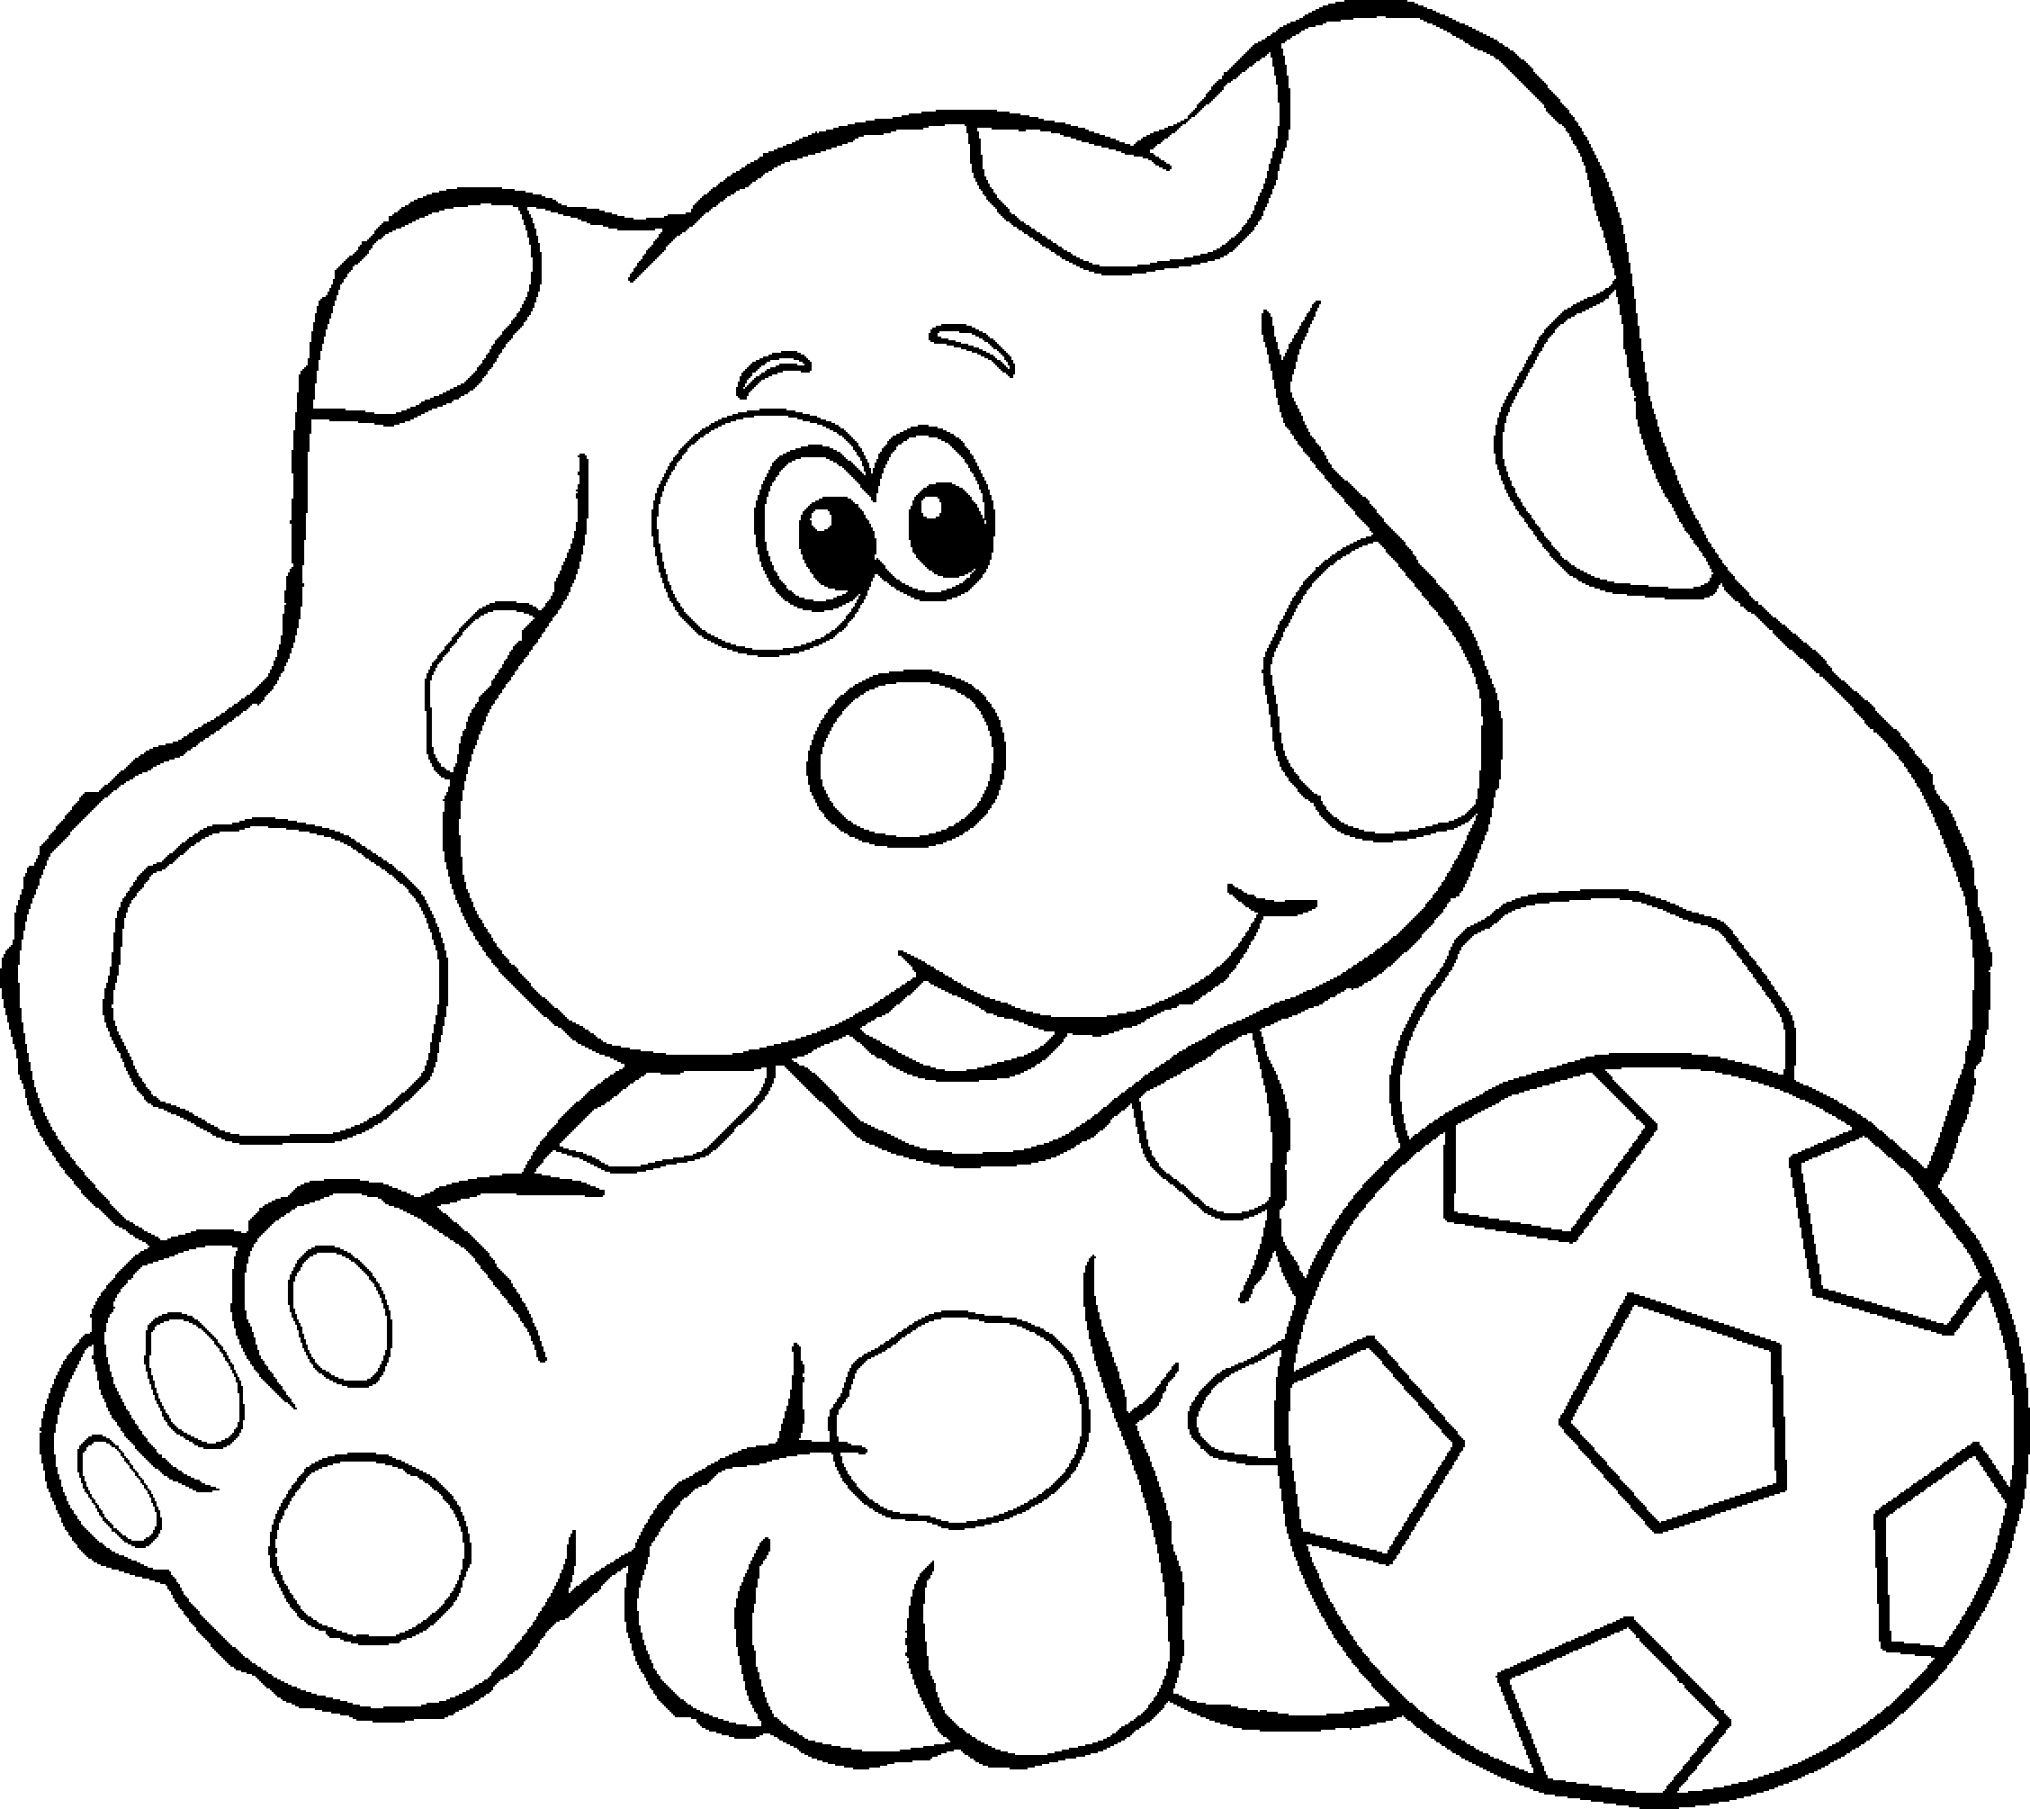 Blues Clues Coloring Pages To Print at